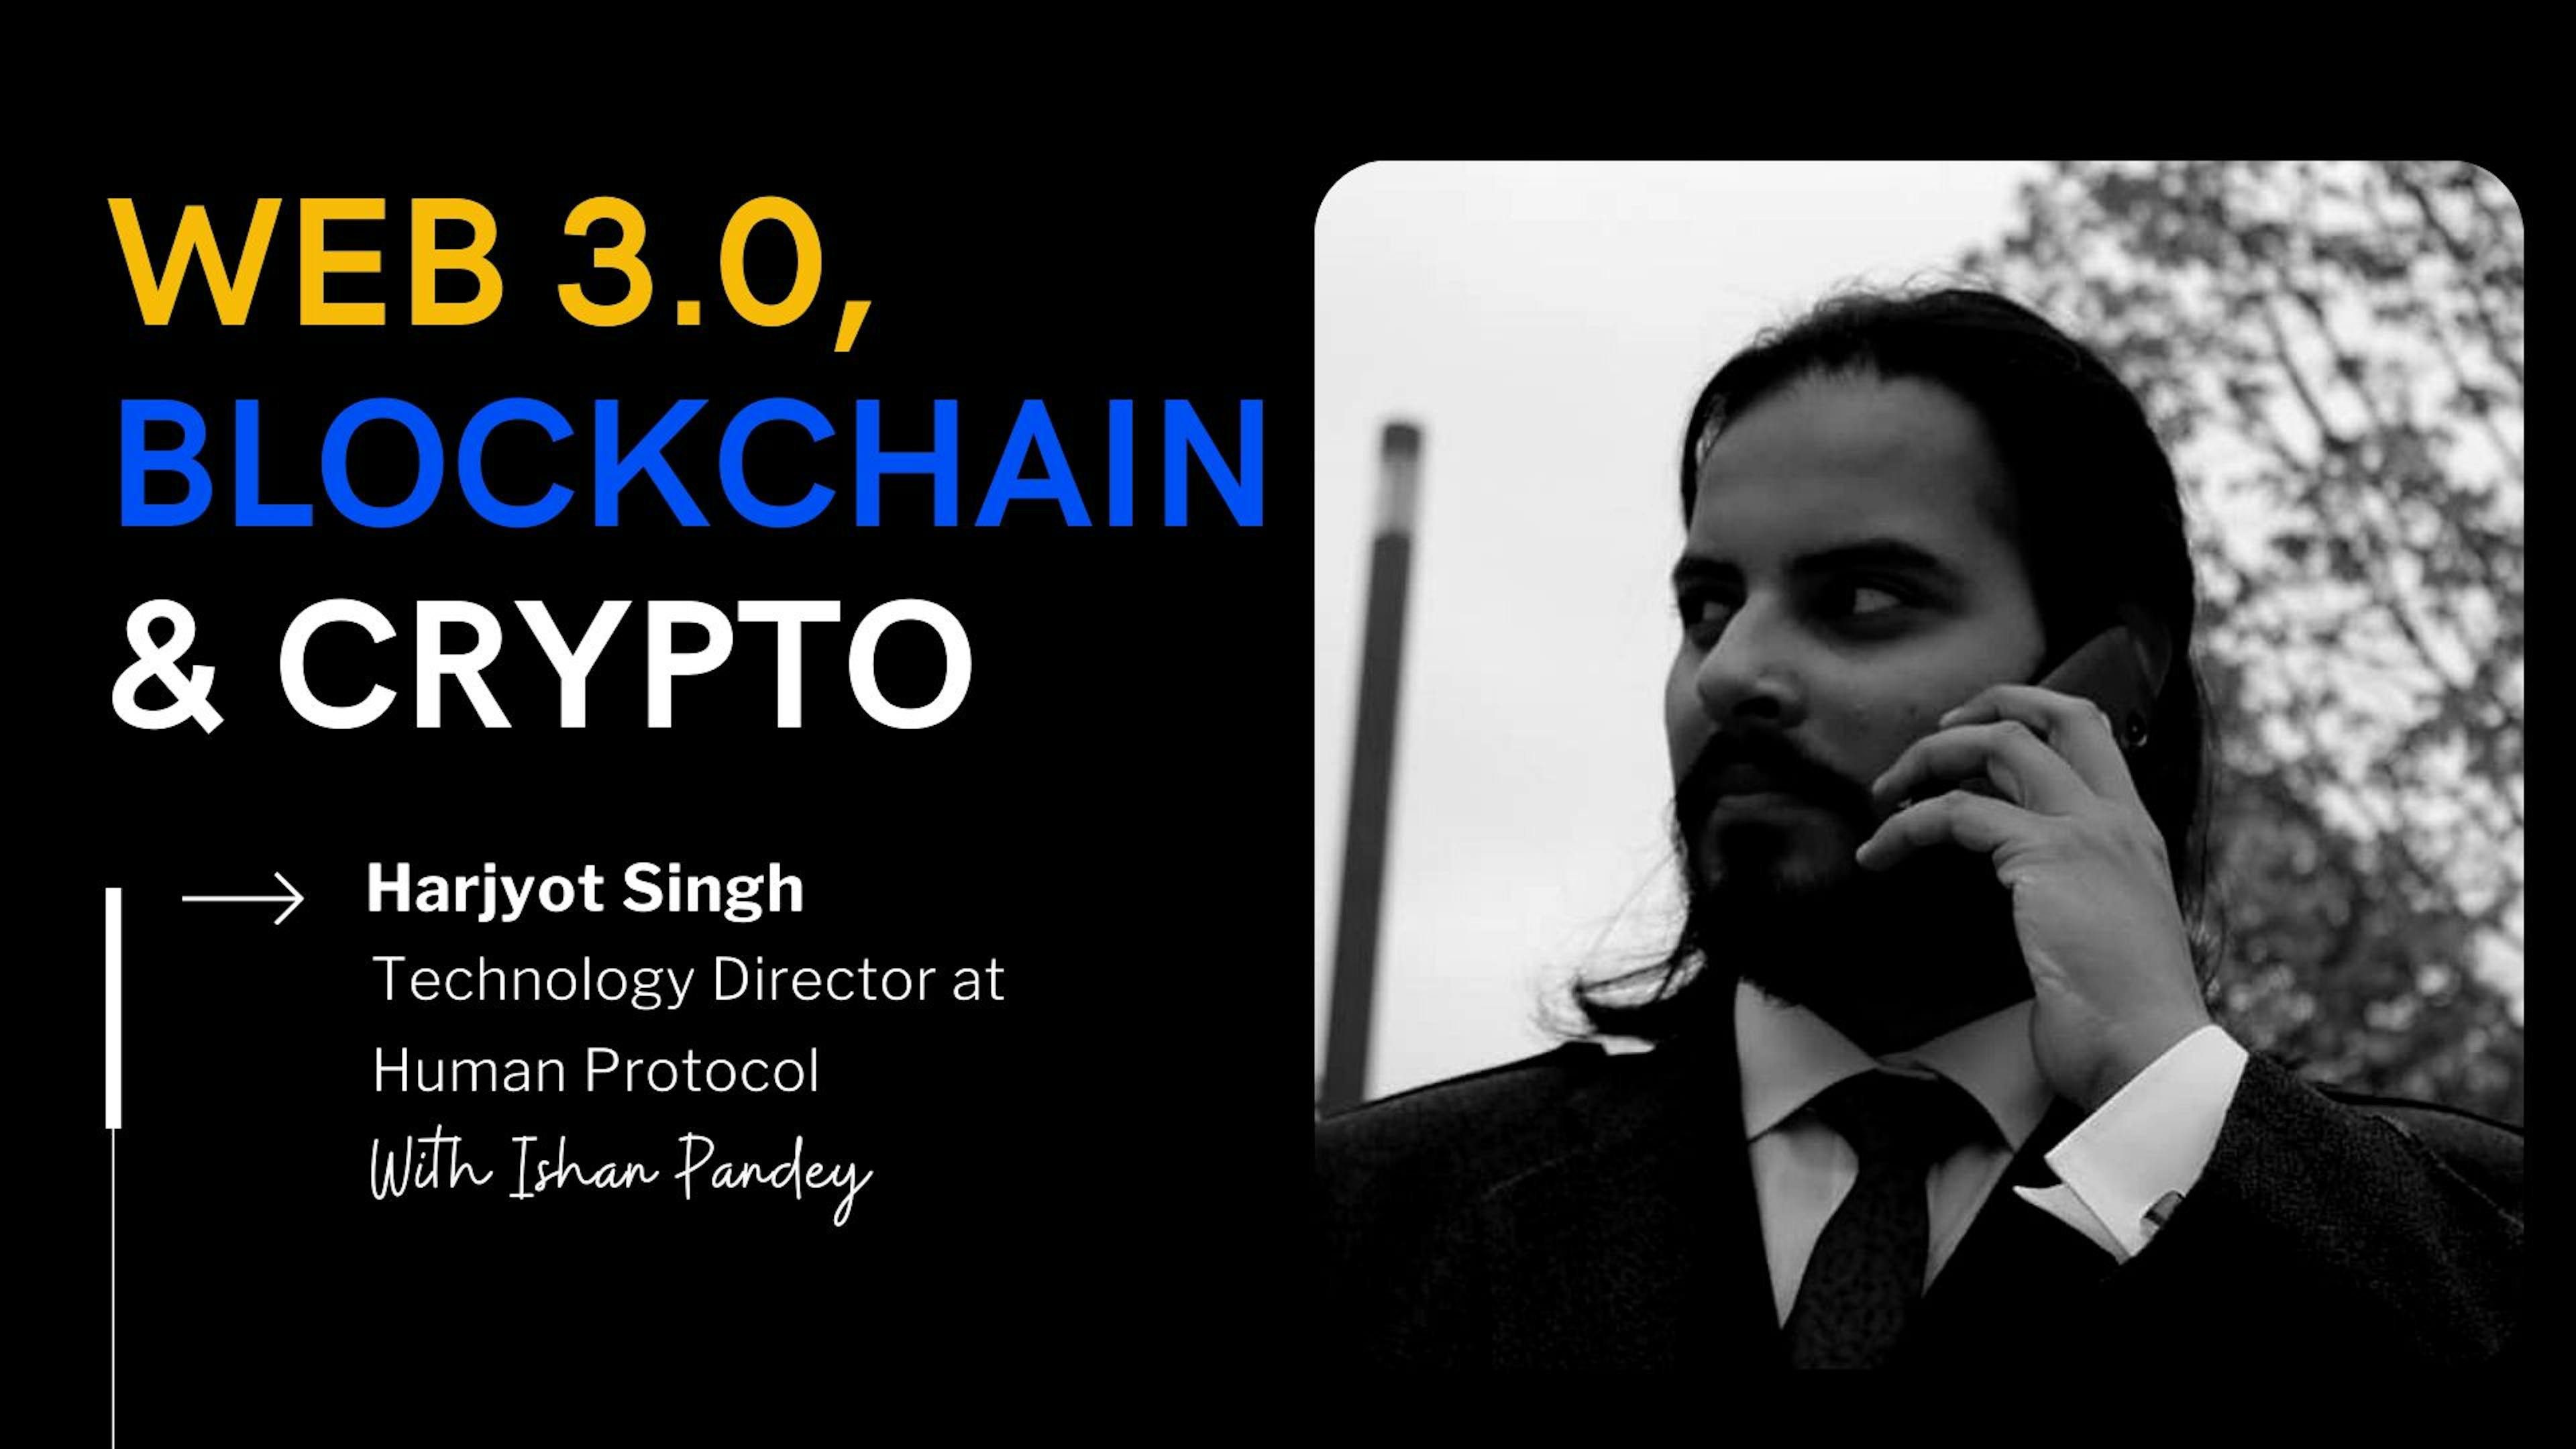 featured image - How the adoption of blockchain technology will evolve: an Interview with Harjyot Singh